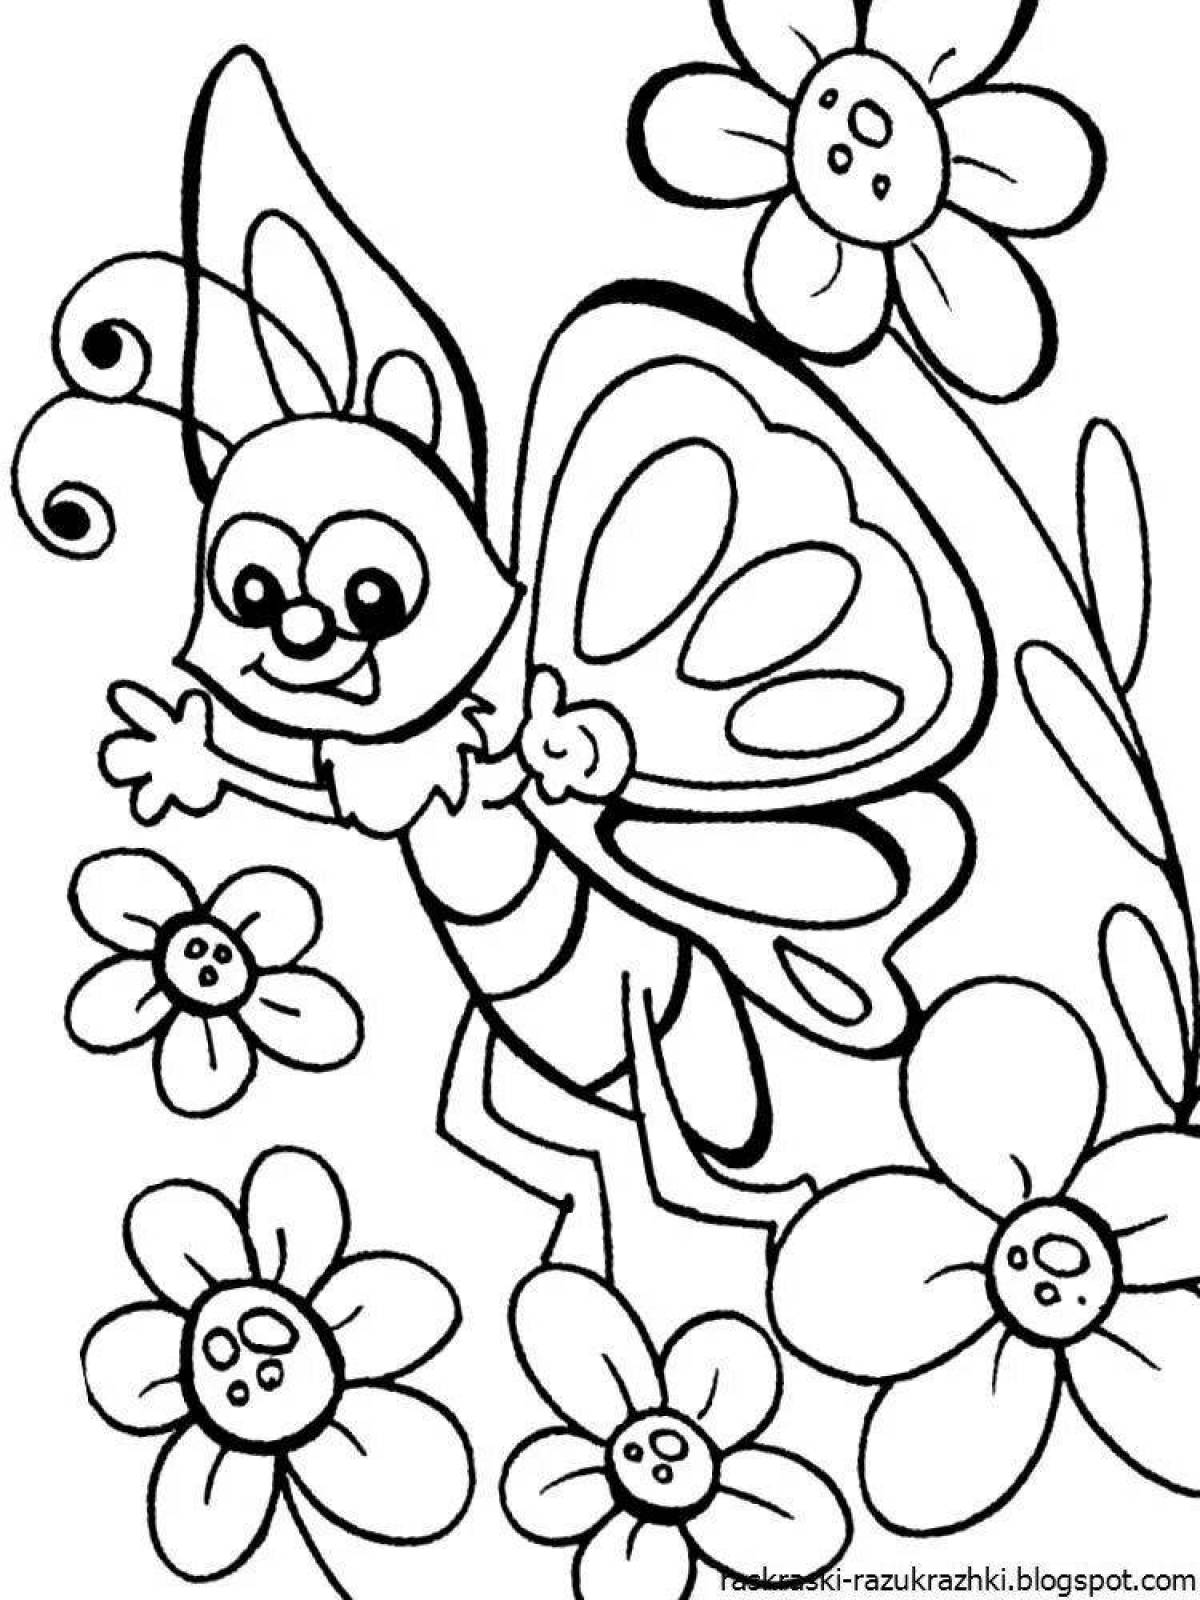 Joyful coloring for children 5-7 years old